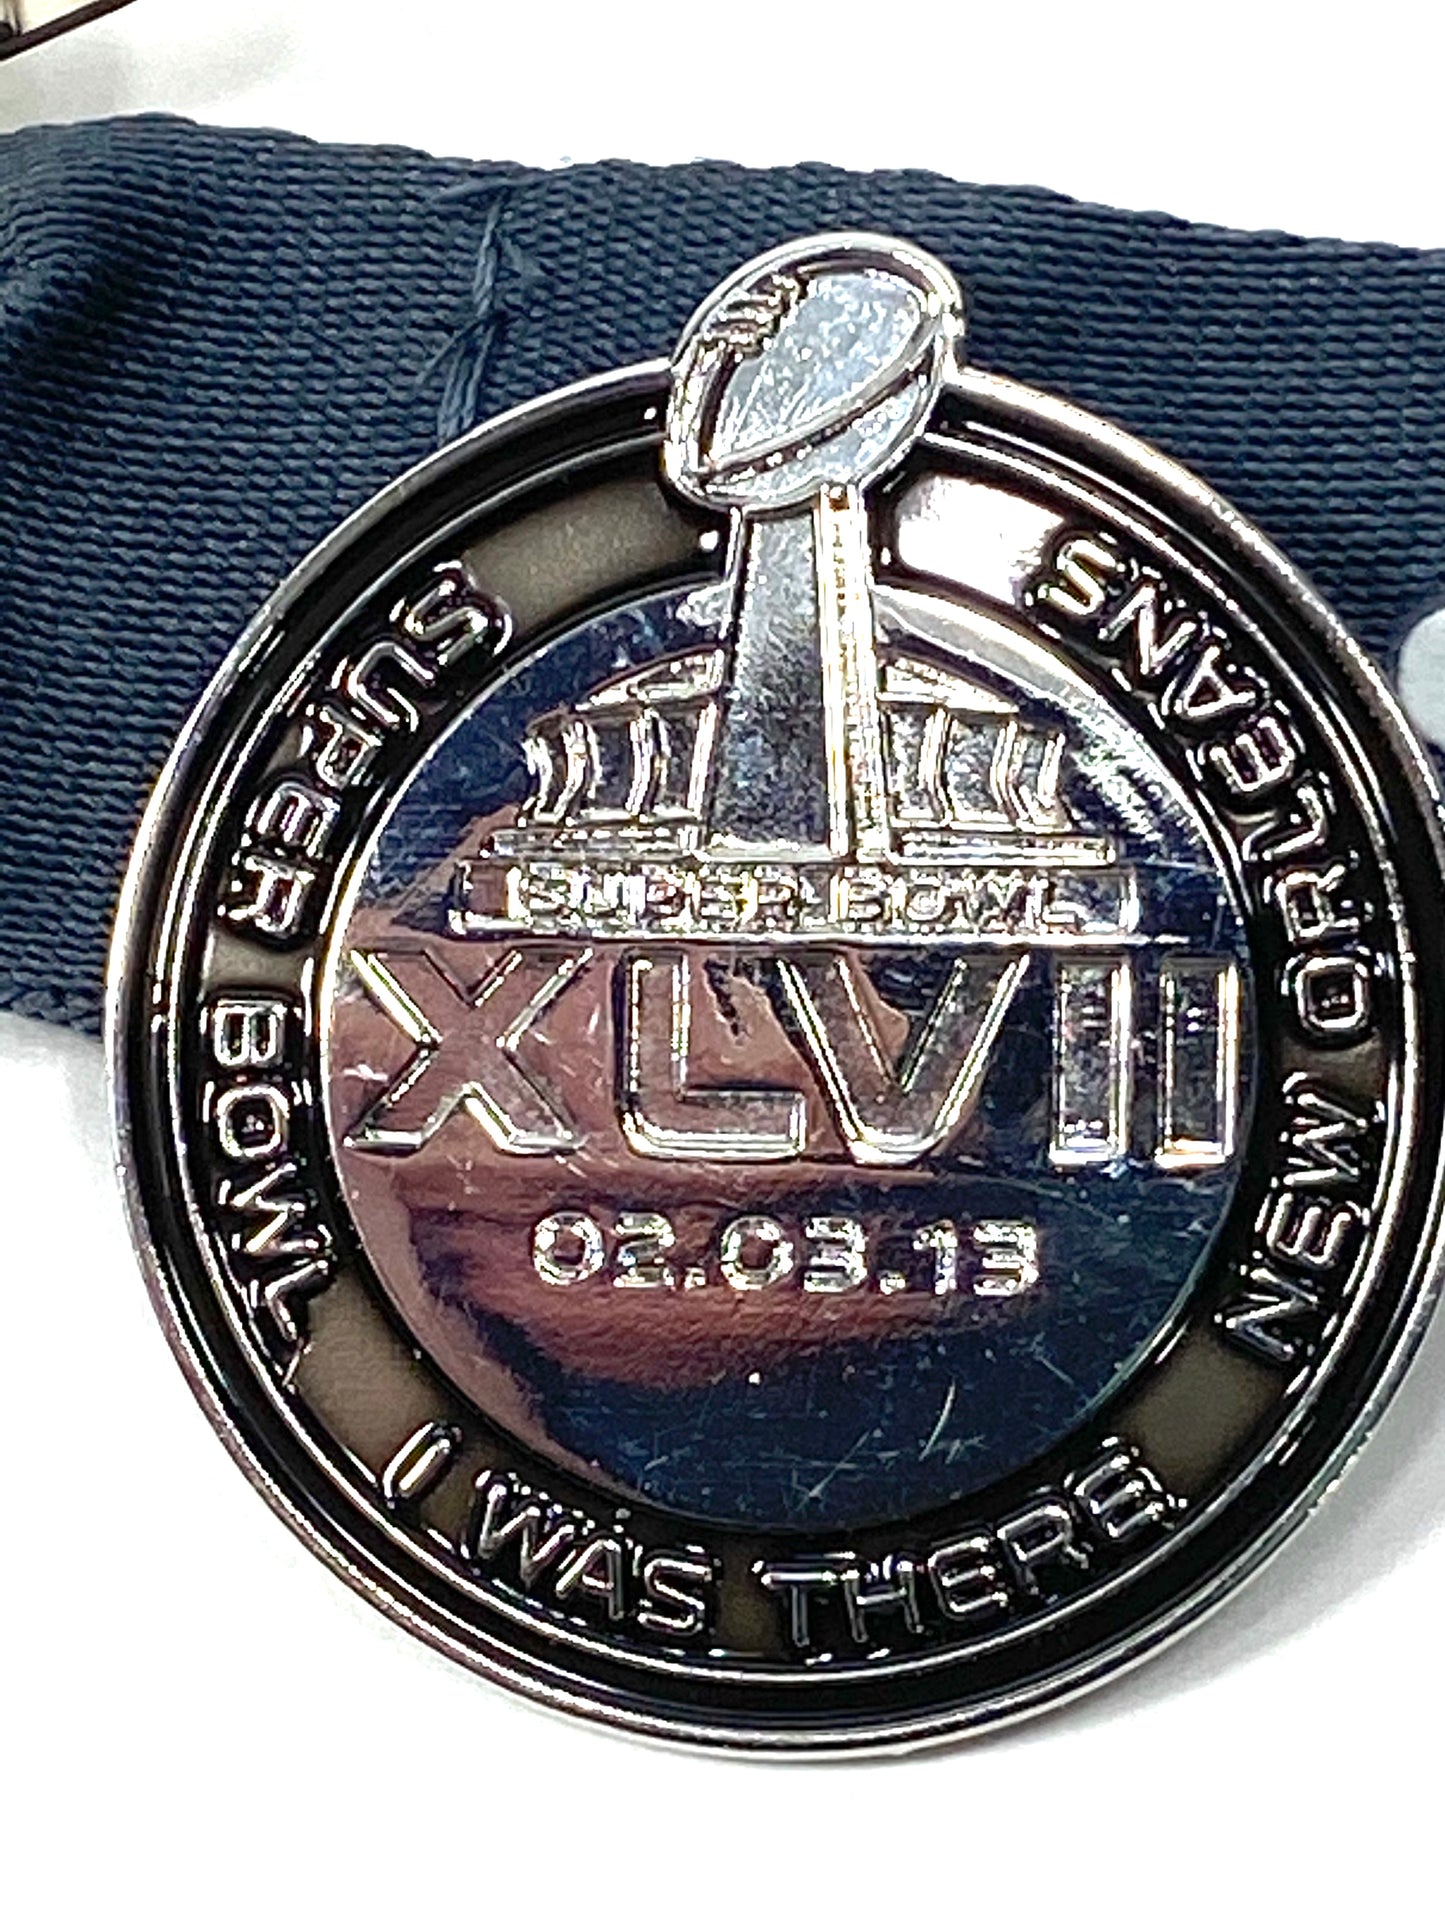 Super Bowl XLVII (47) Collectible Lanyard/Pin/Ticket Holder NOS By Pro Specialties Group